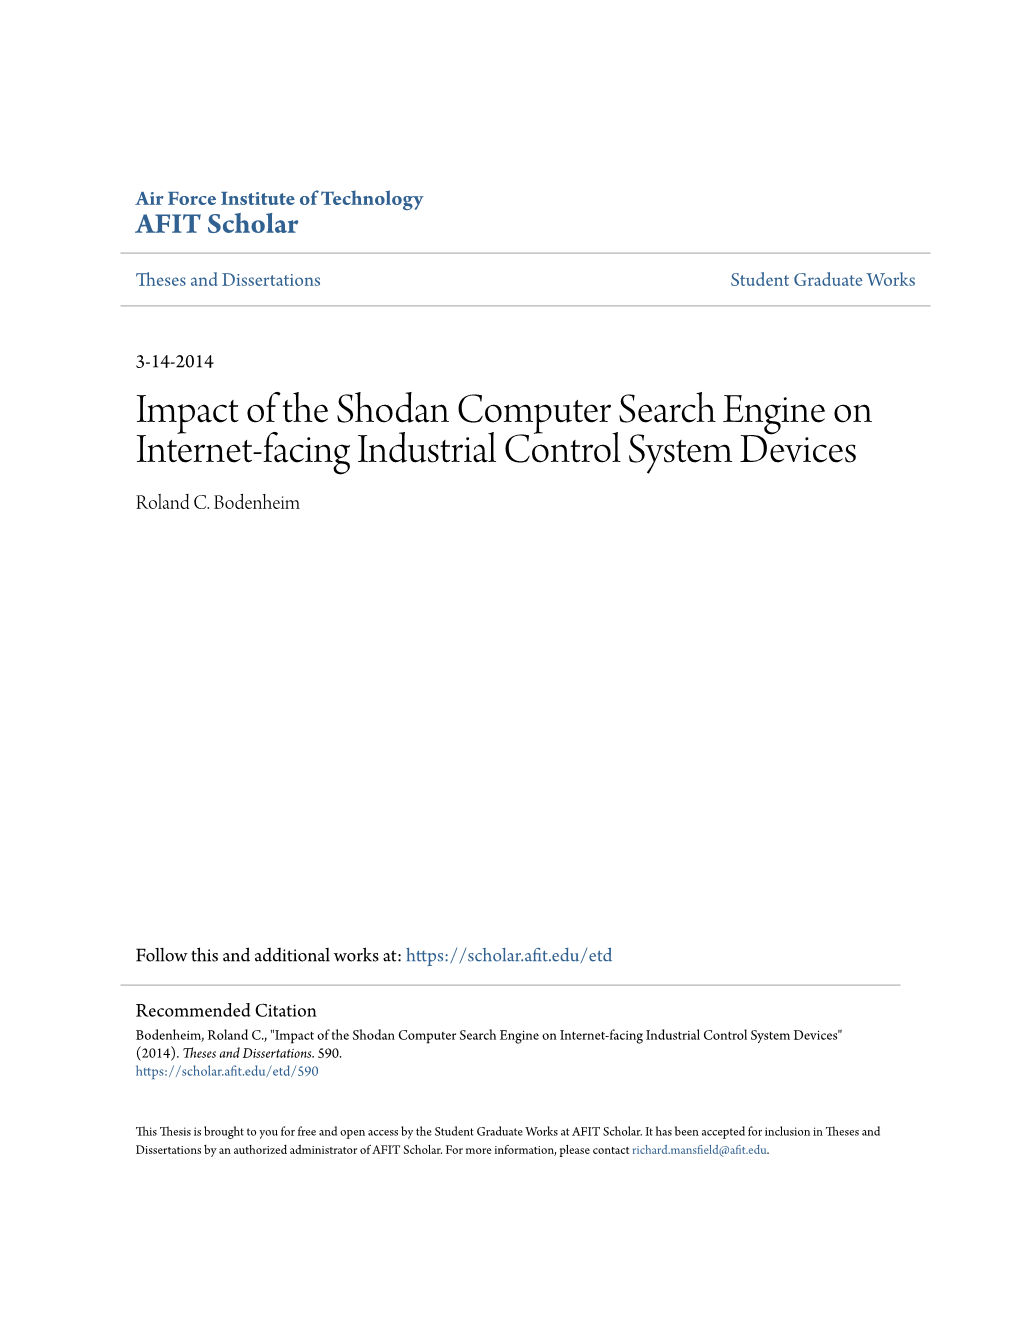 Impact of the Shodan Computer Search Engine on Internet-Facing Industrial Control System Devices Roland C